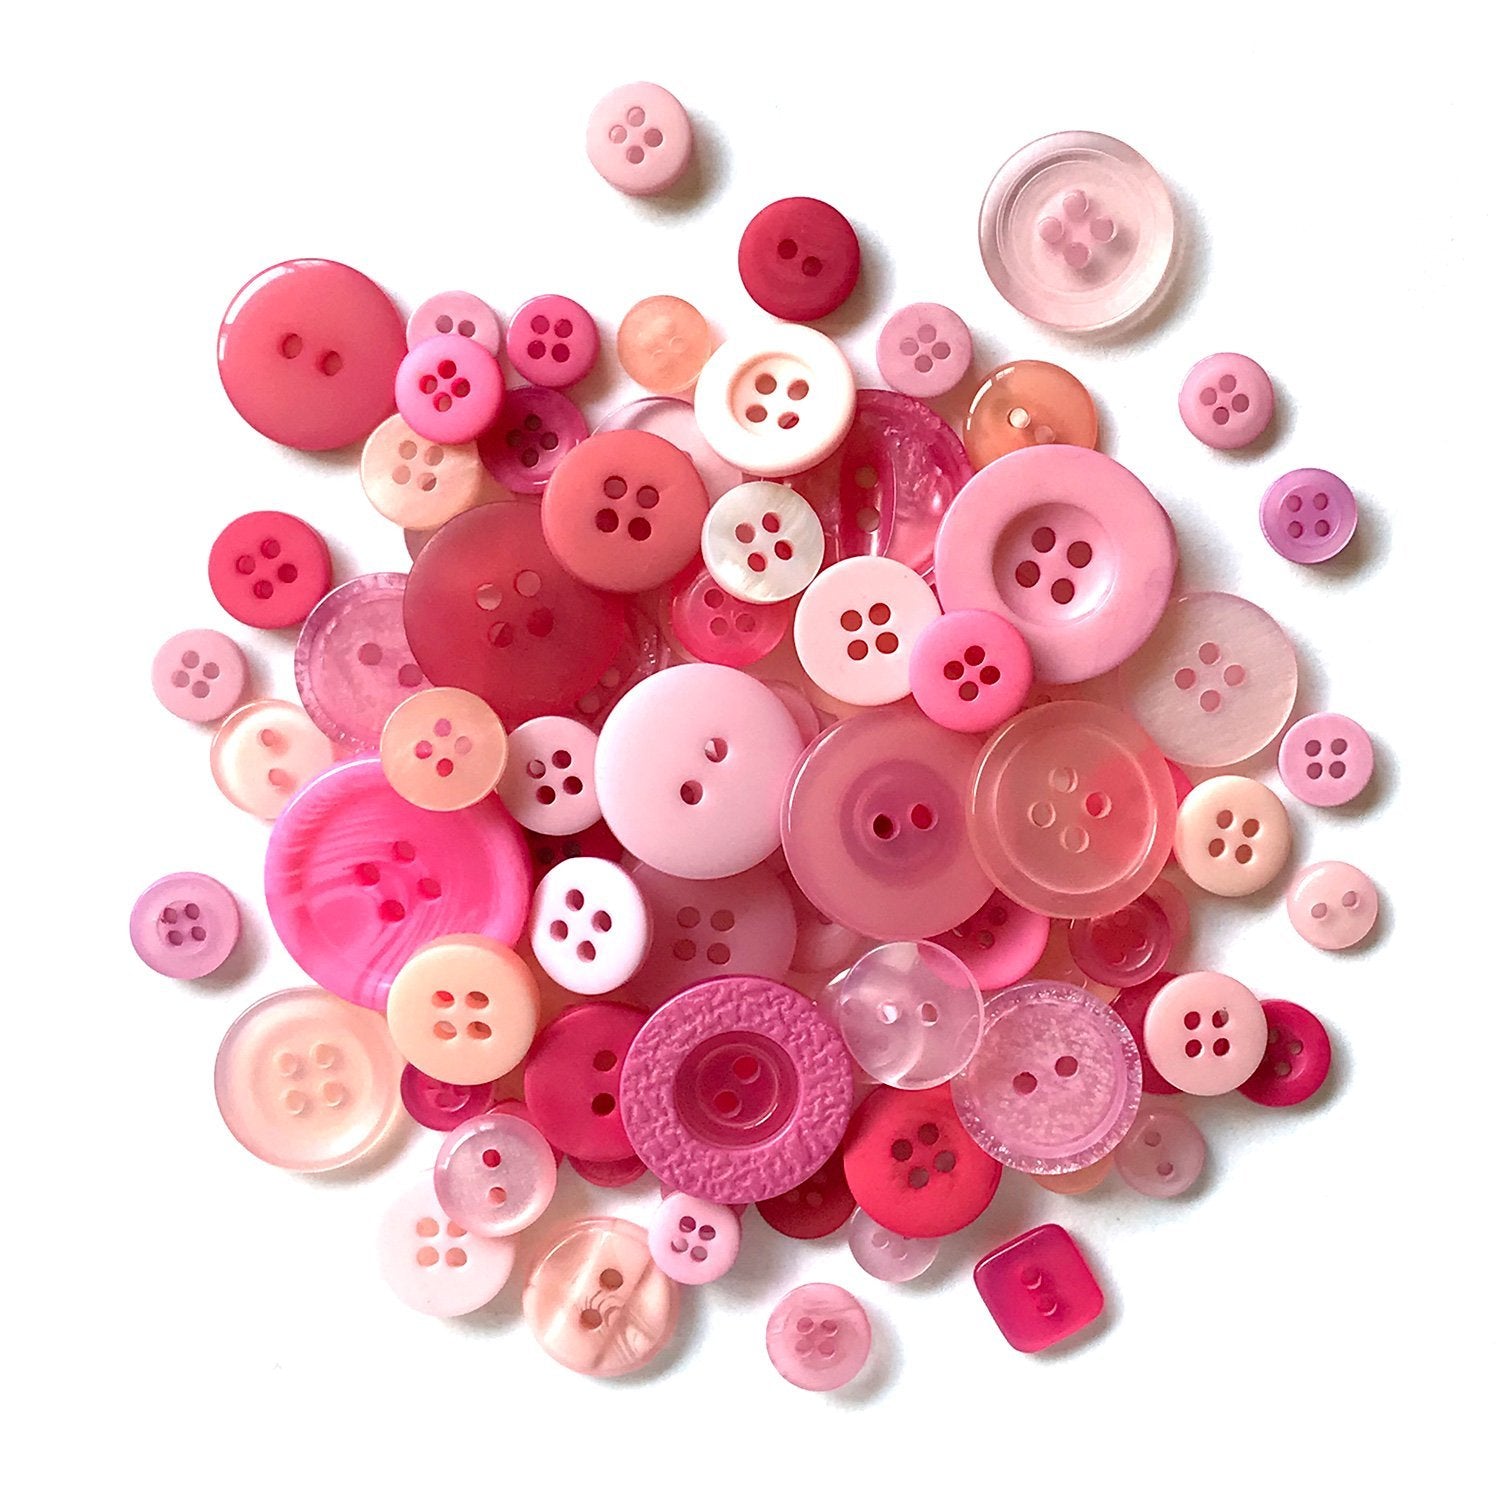 Pink Button Stock Photo 53605801